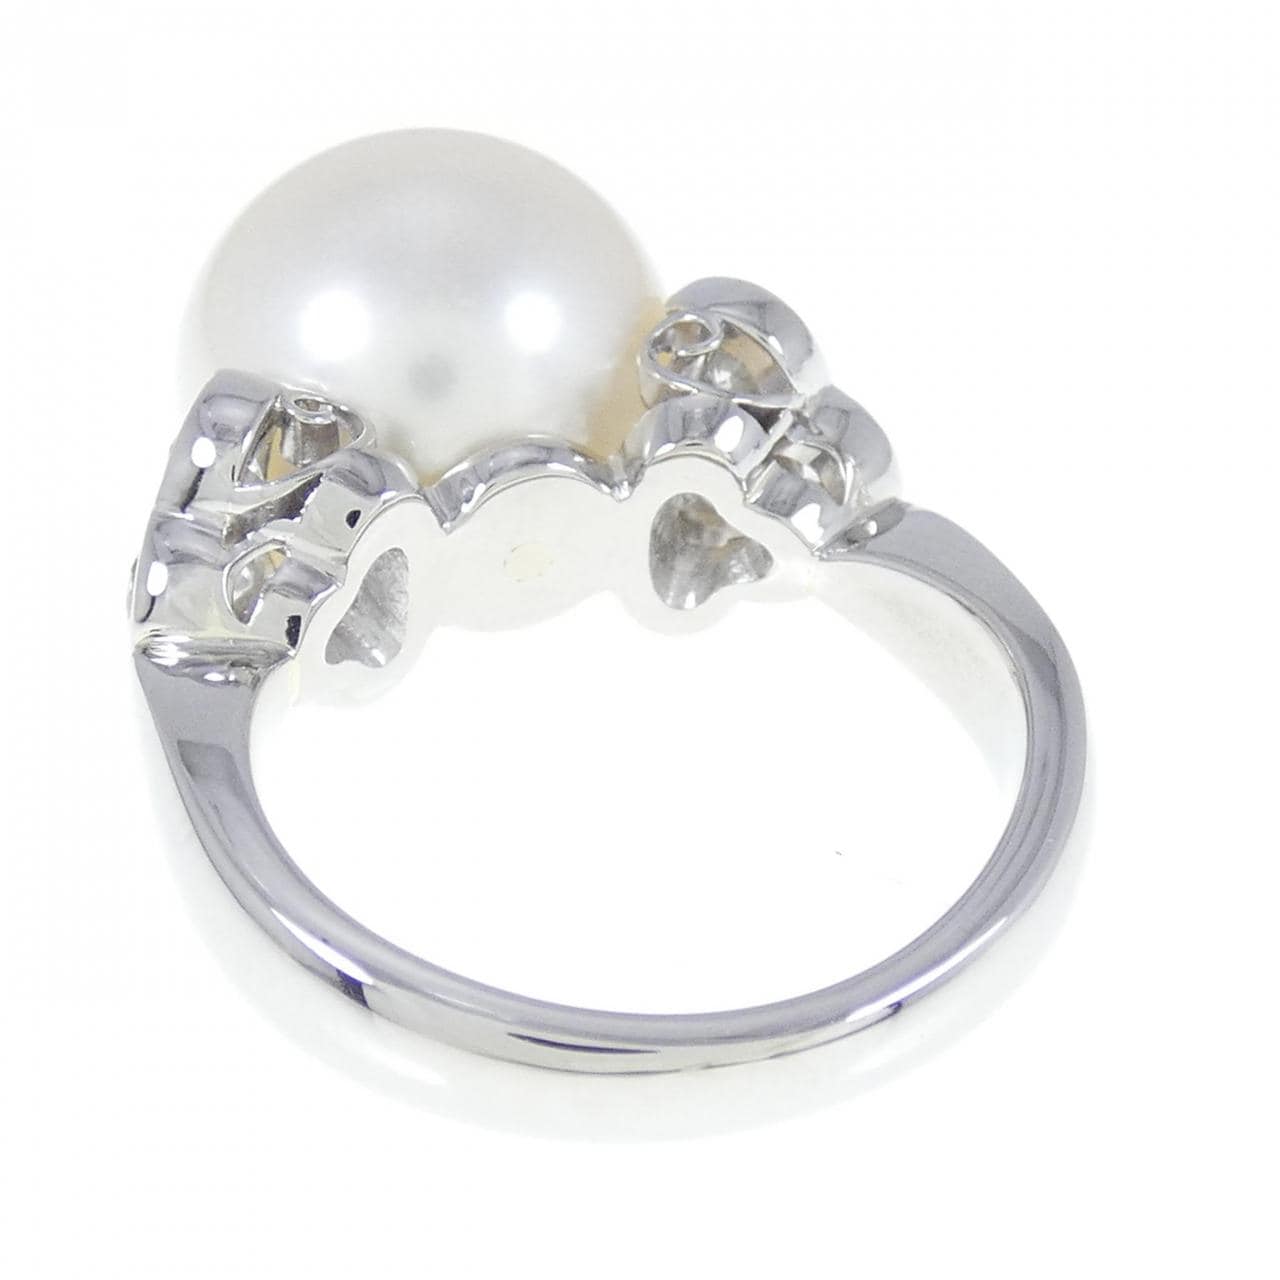 PT White Butterfly Pearl ring 12.5mm